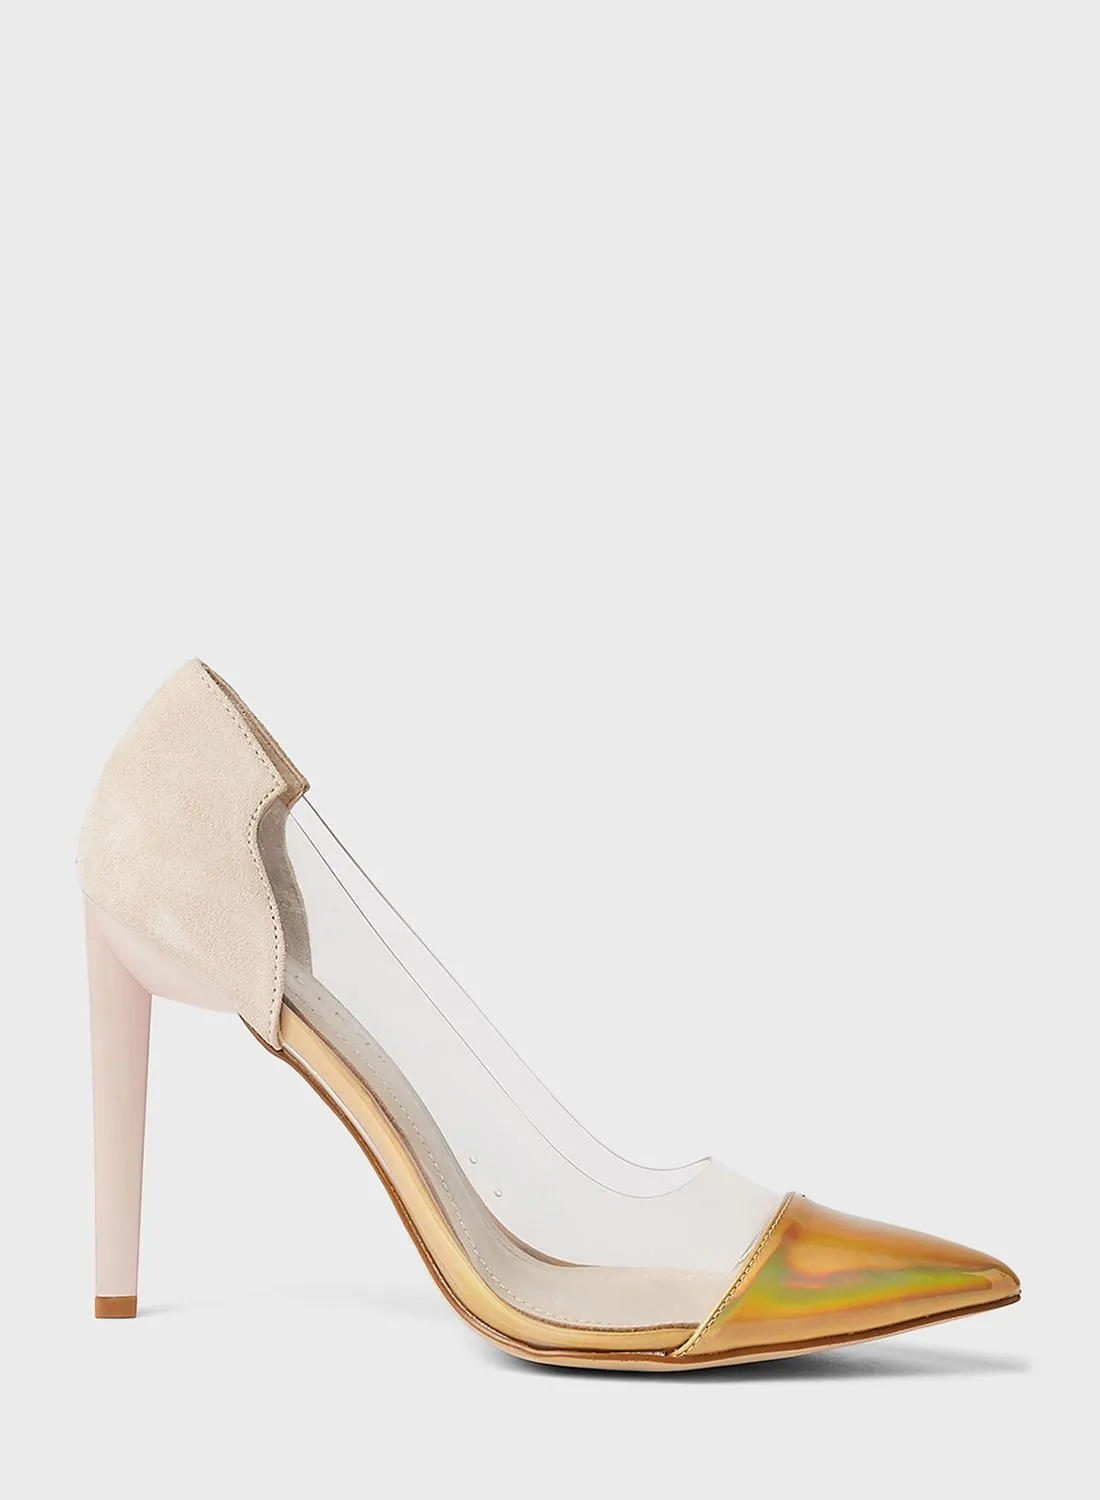 KENDALL + KYLIE Clear Panelled Pumps